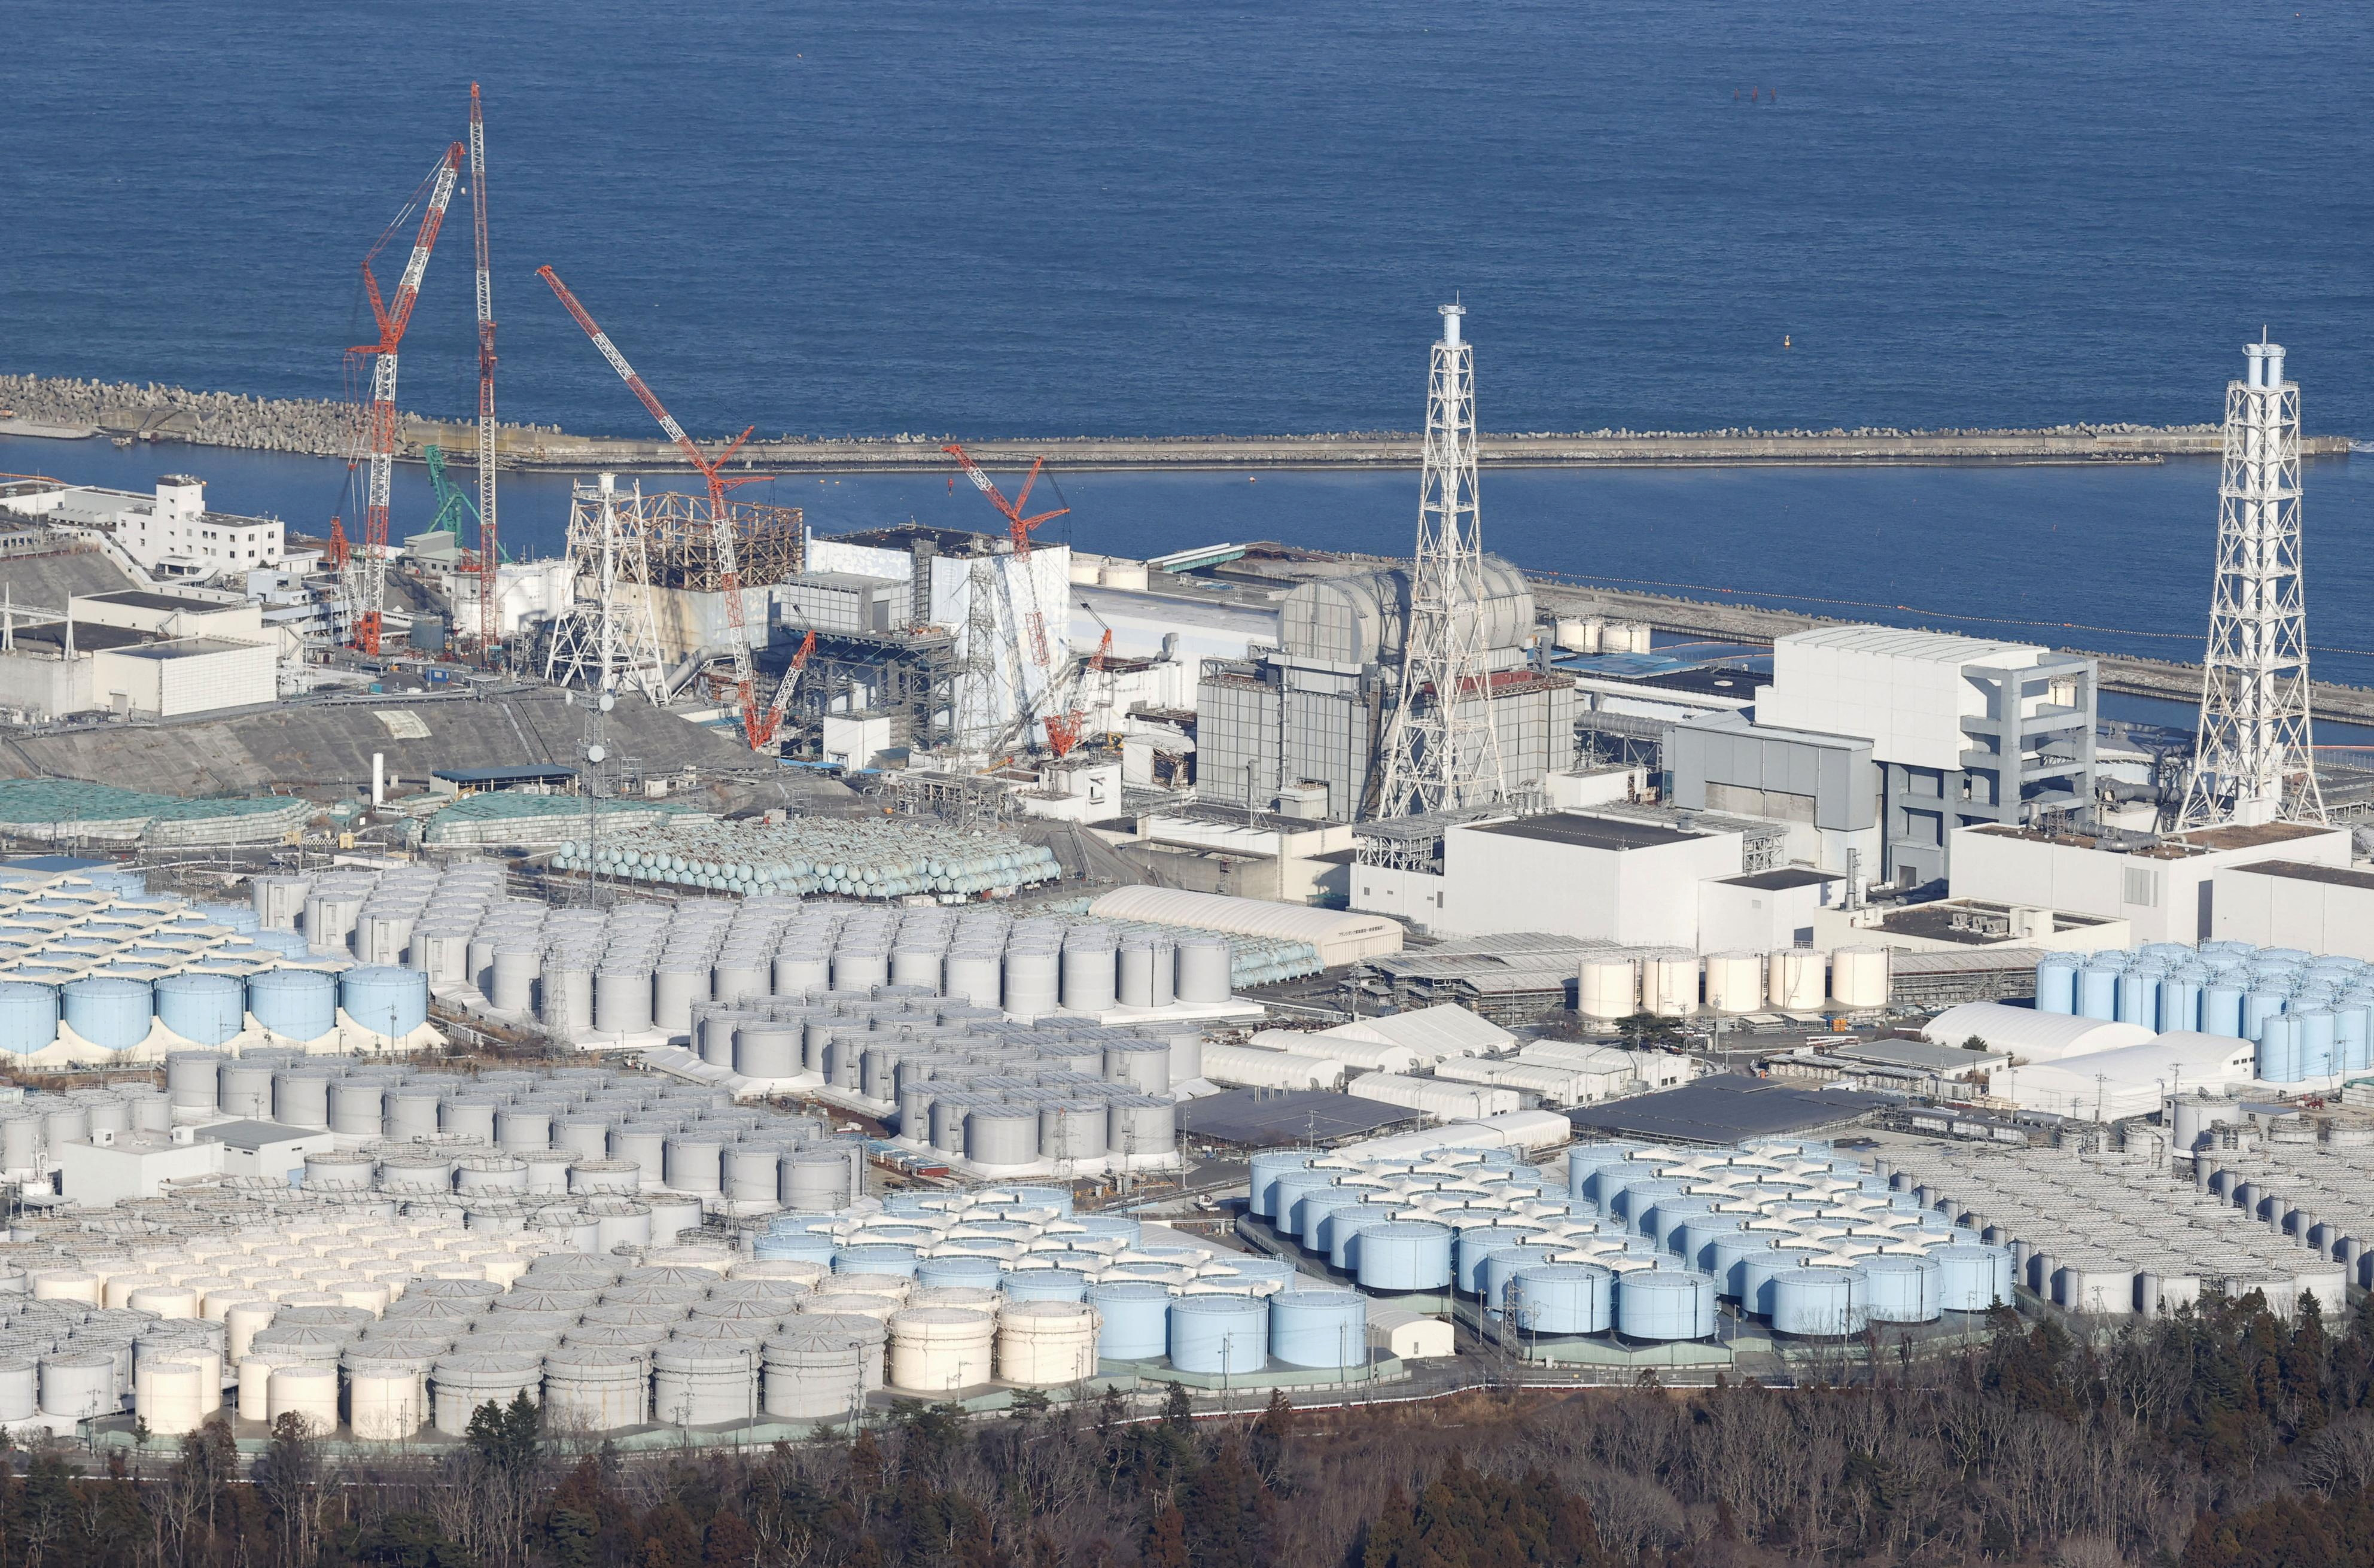 Japan plans to release nuclear wastewater into the sea - Is it safe?